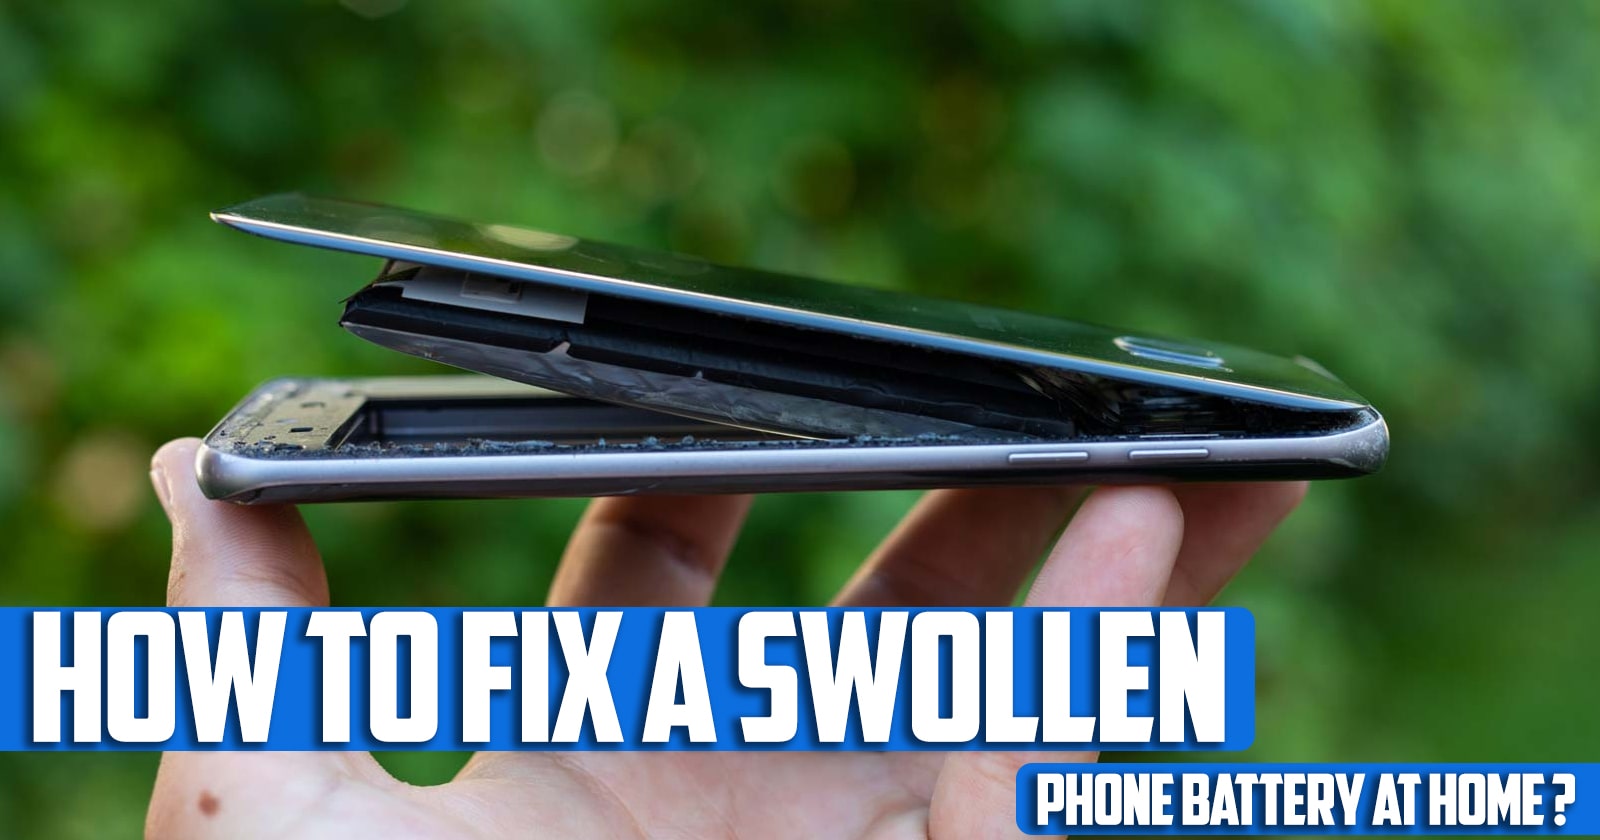 How to fix a swollen phone battery at home